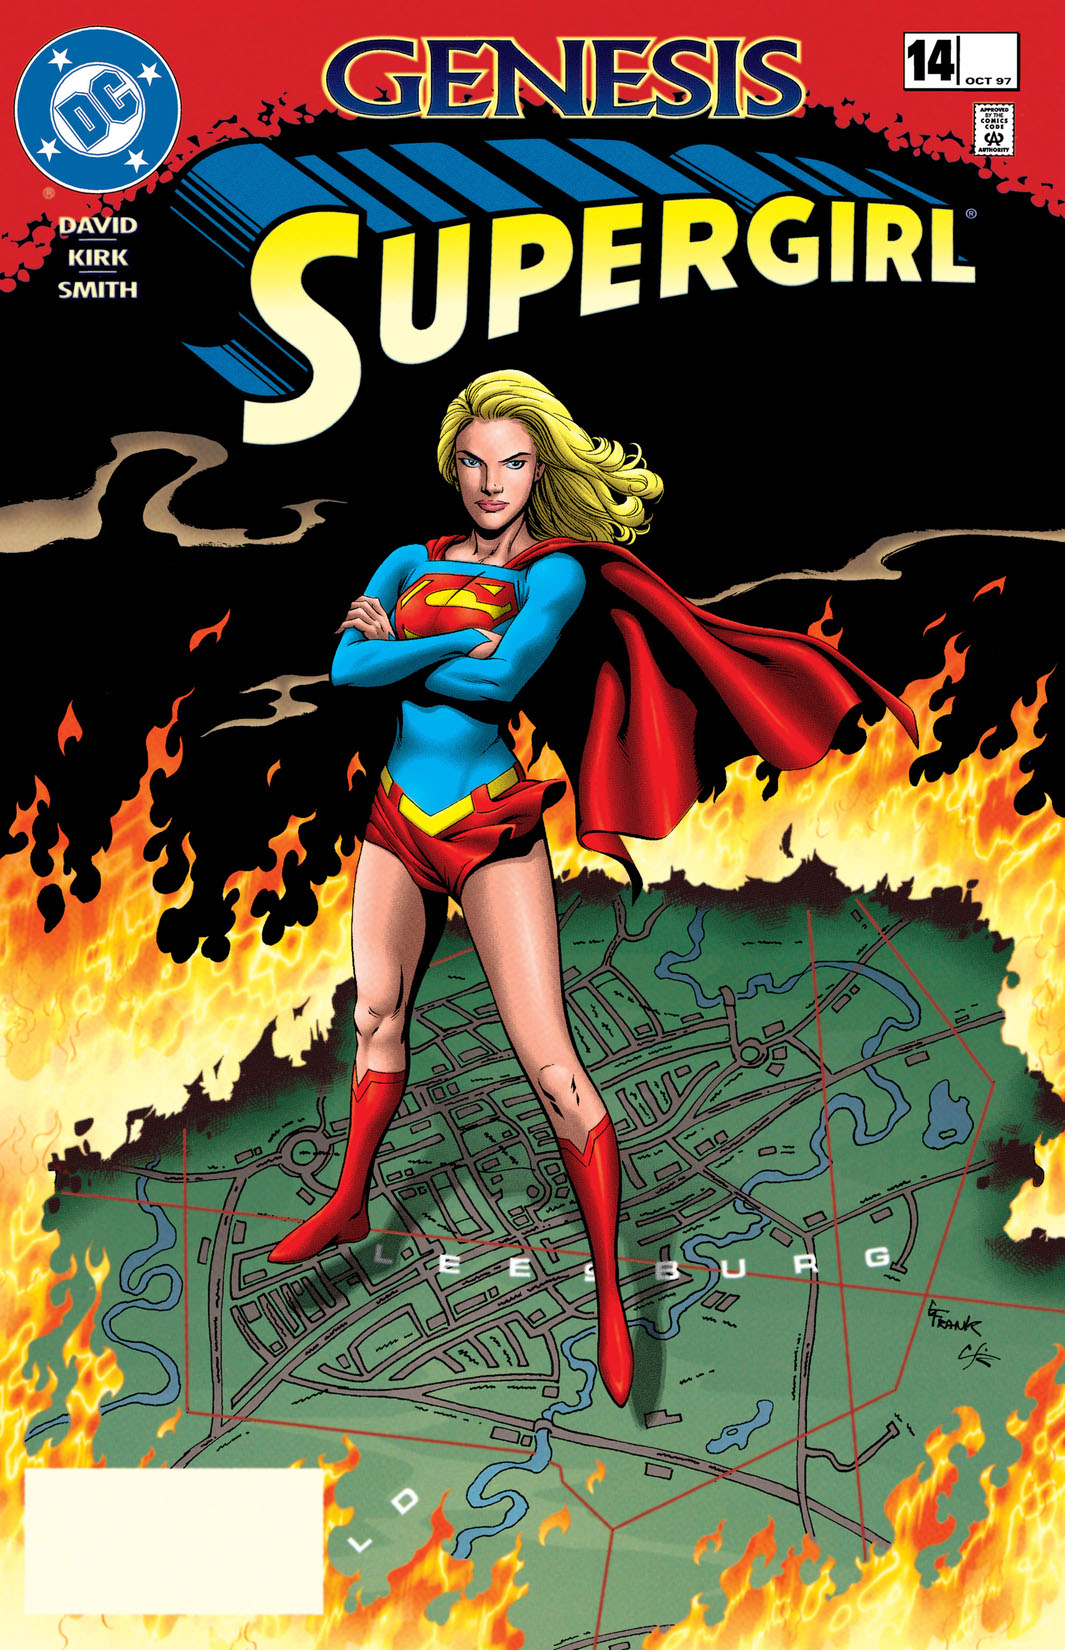 Supergirl (1996-) #14 preview images